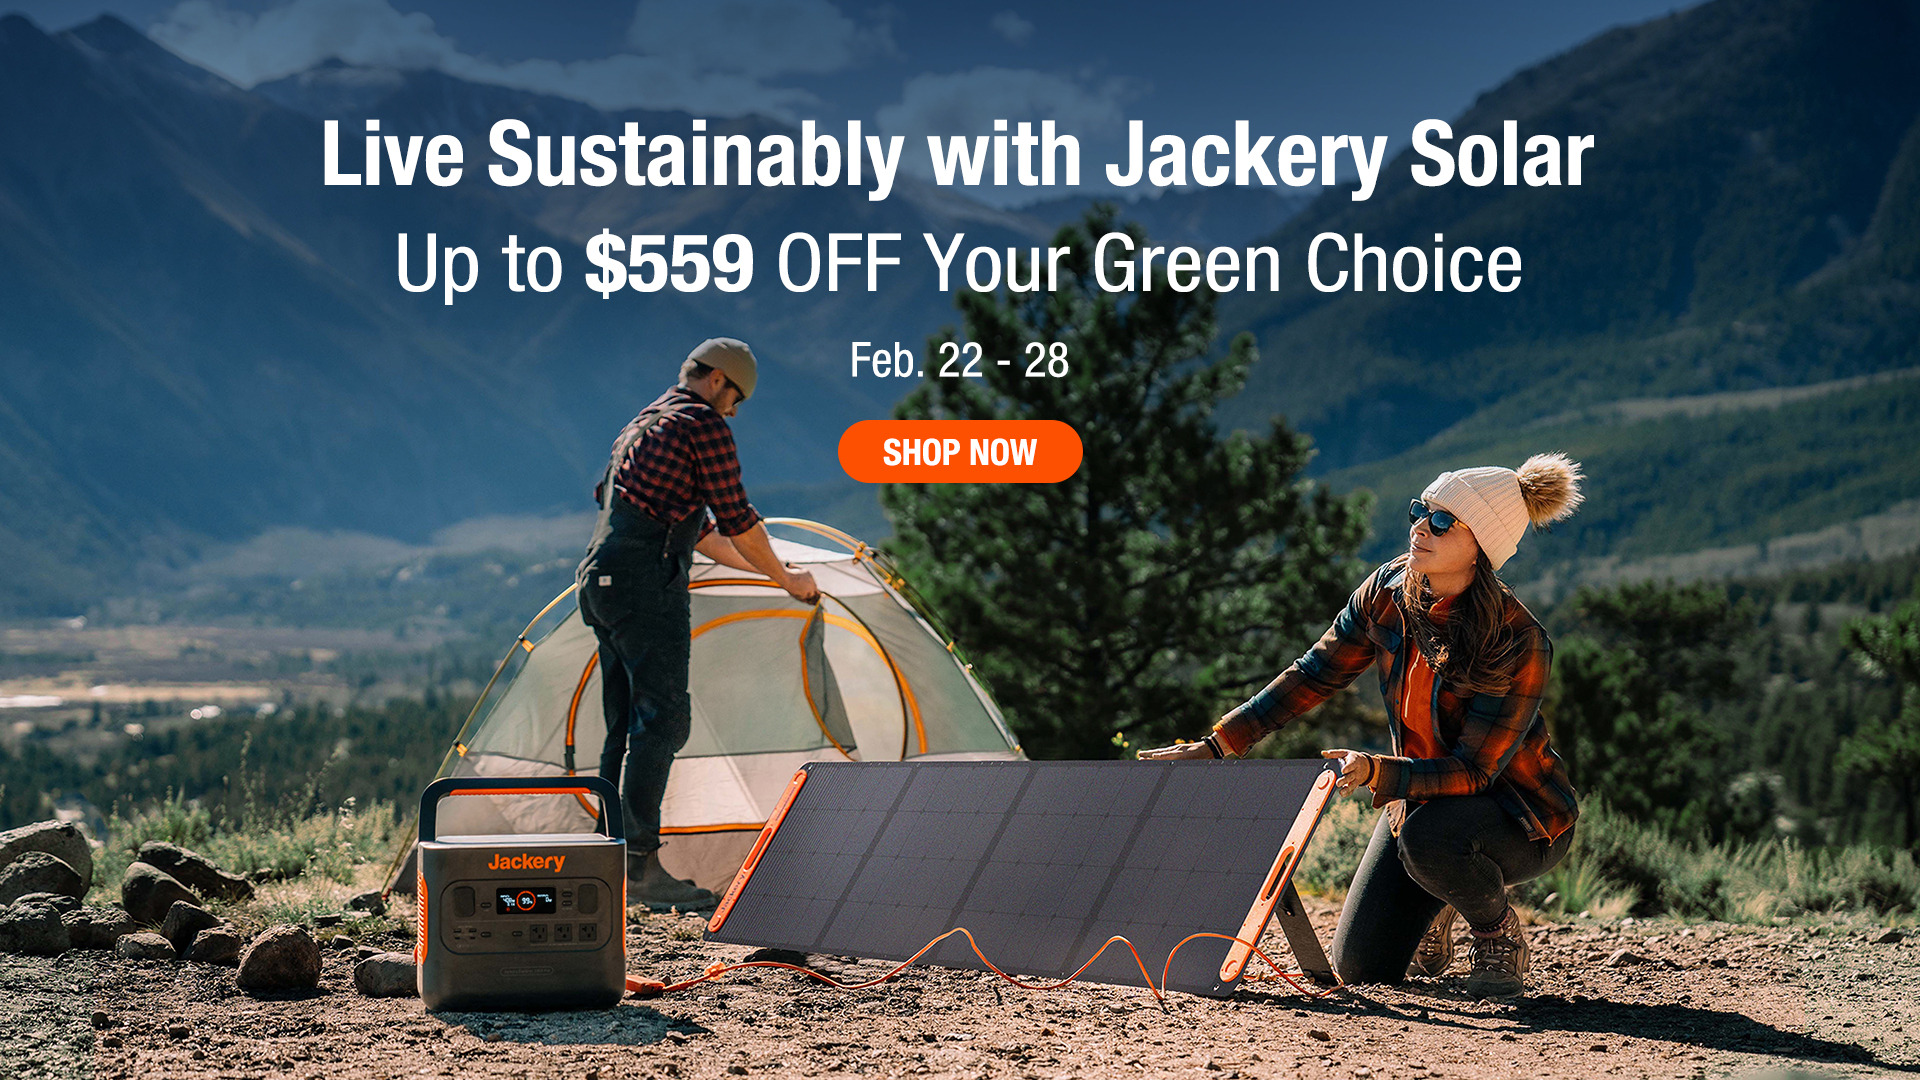 Sustainable Living with Jackery Solar Sale Up To 30% Off Some Product Solar Generator Power Station Solar Panels Explorer 500, 1000, 1500, 2000 Pro And too many more to list